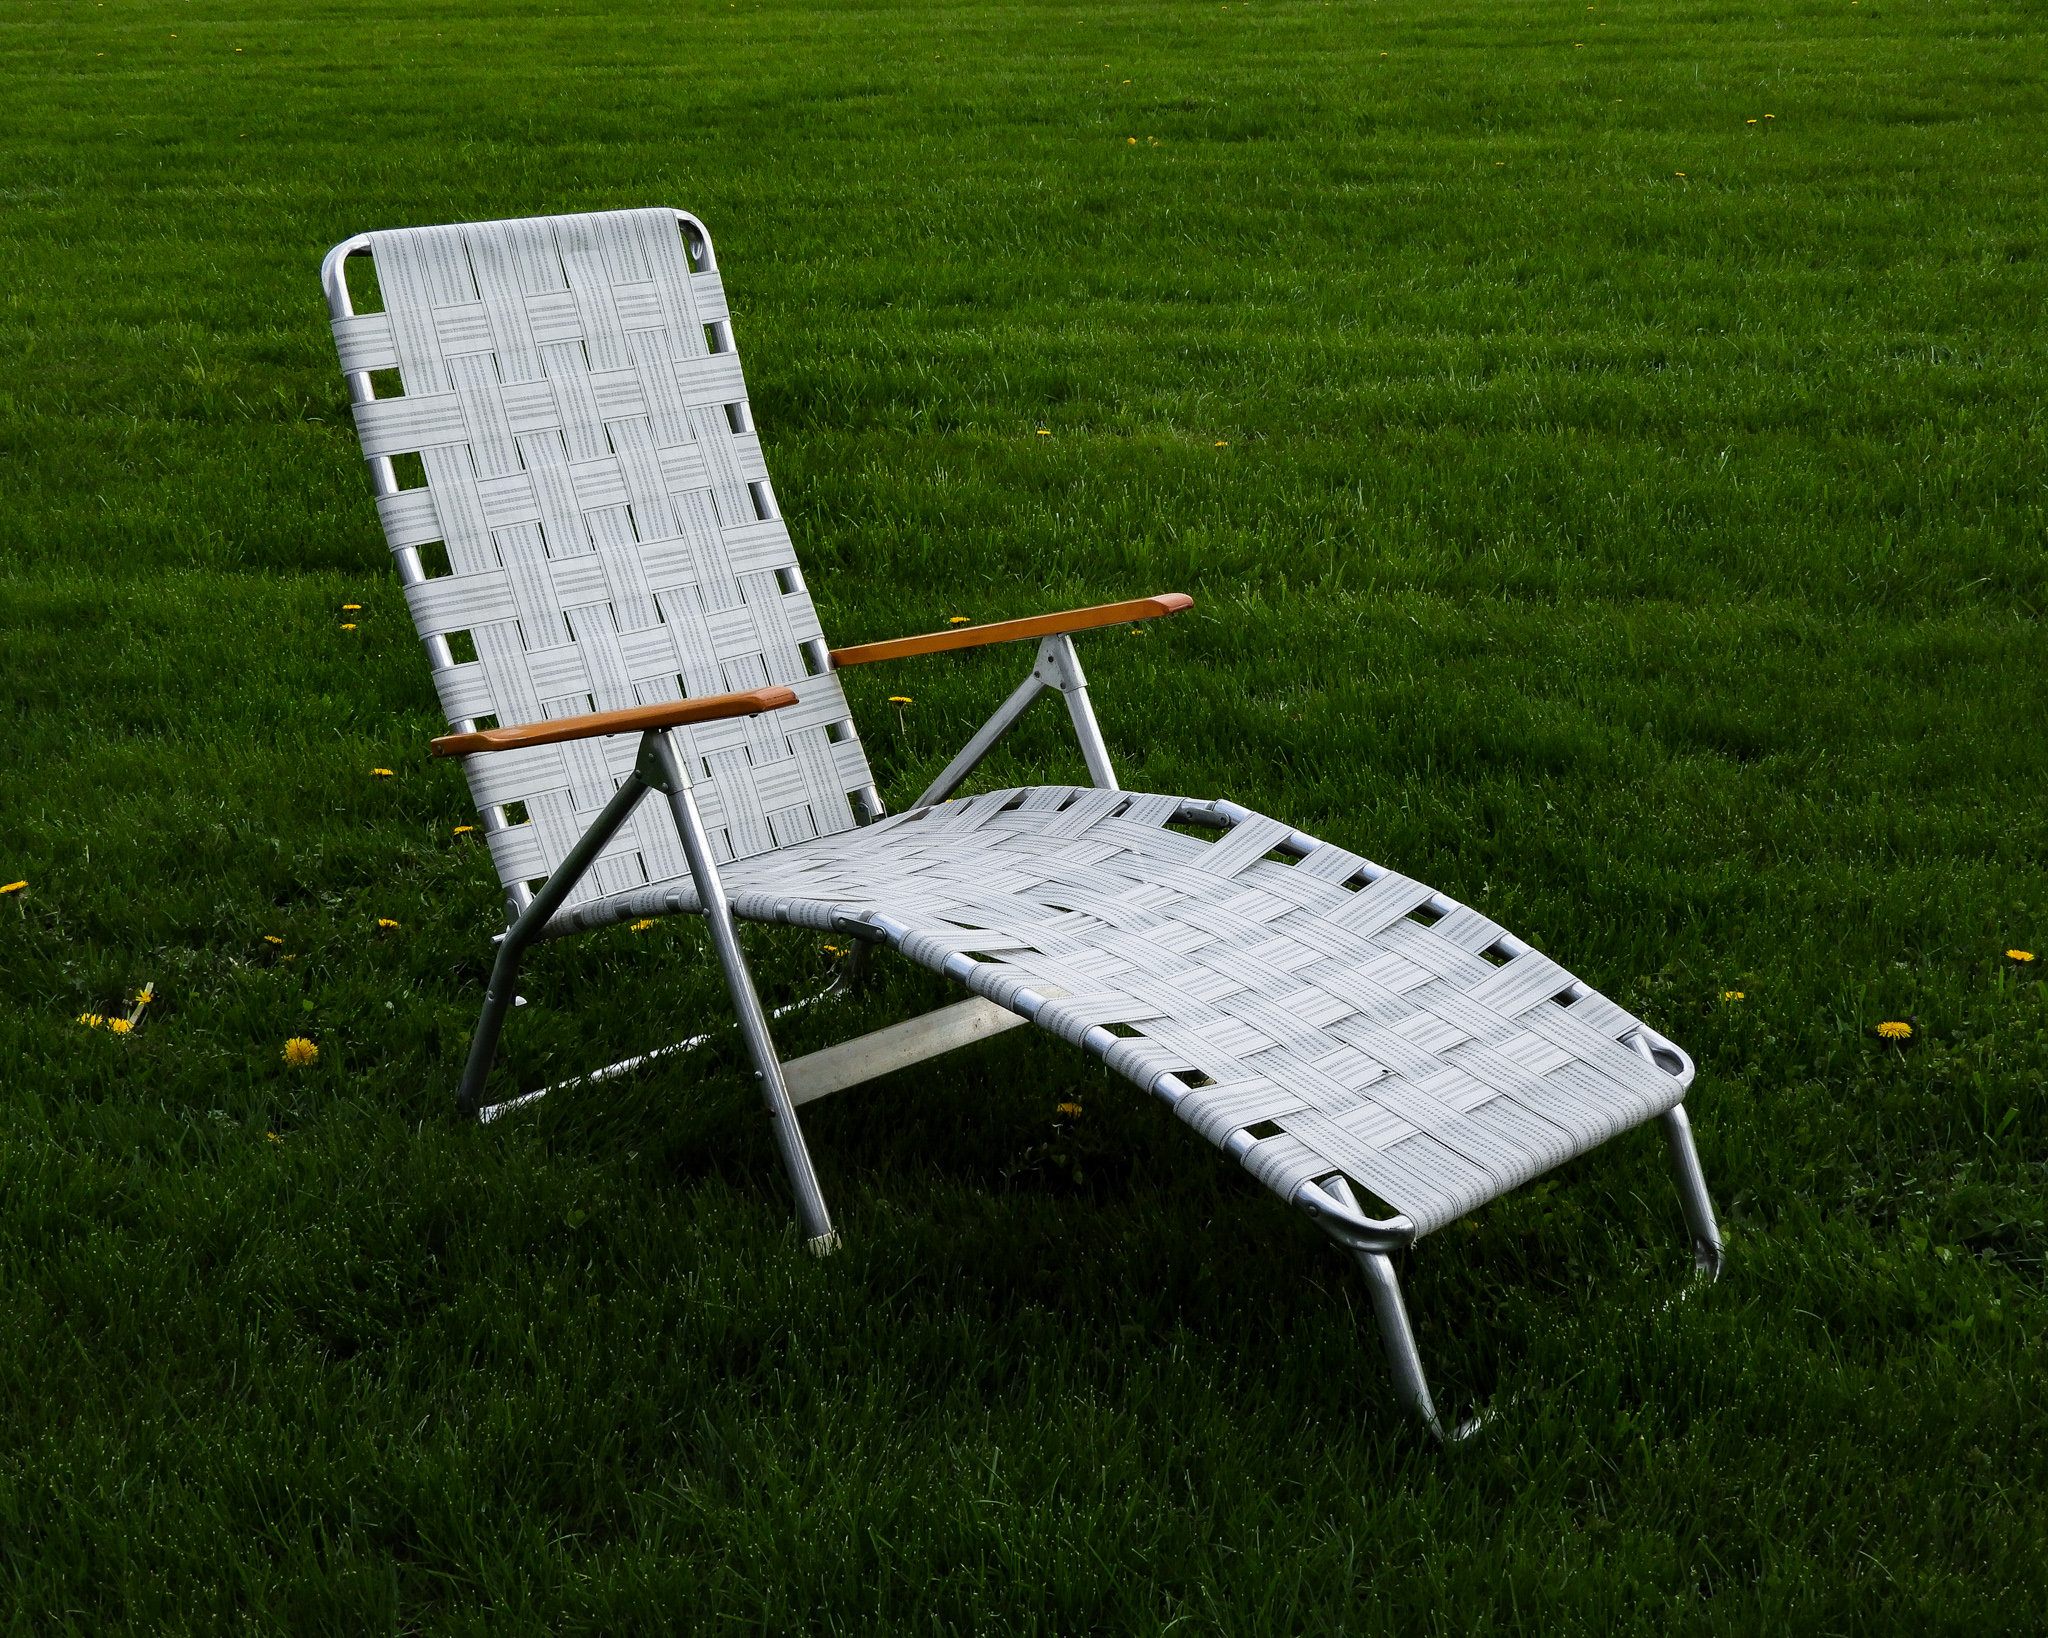 Vintage Chaise Lounge, Genuine Telescope, Wooden Armrests, Lawn Chair ...